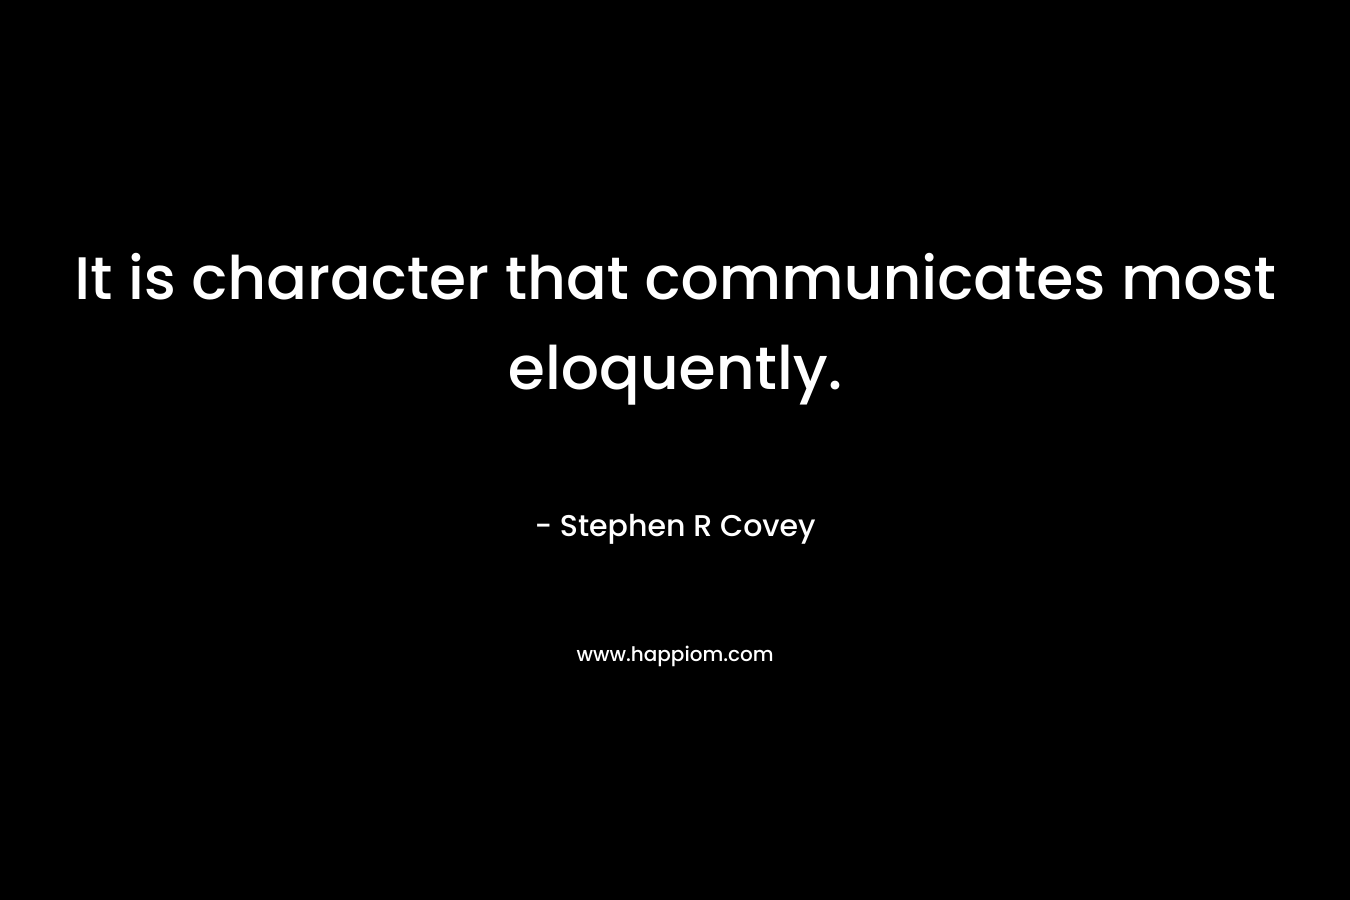 It is character that communicates most eloquently. – Stephen R Covey